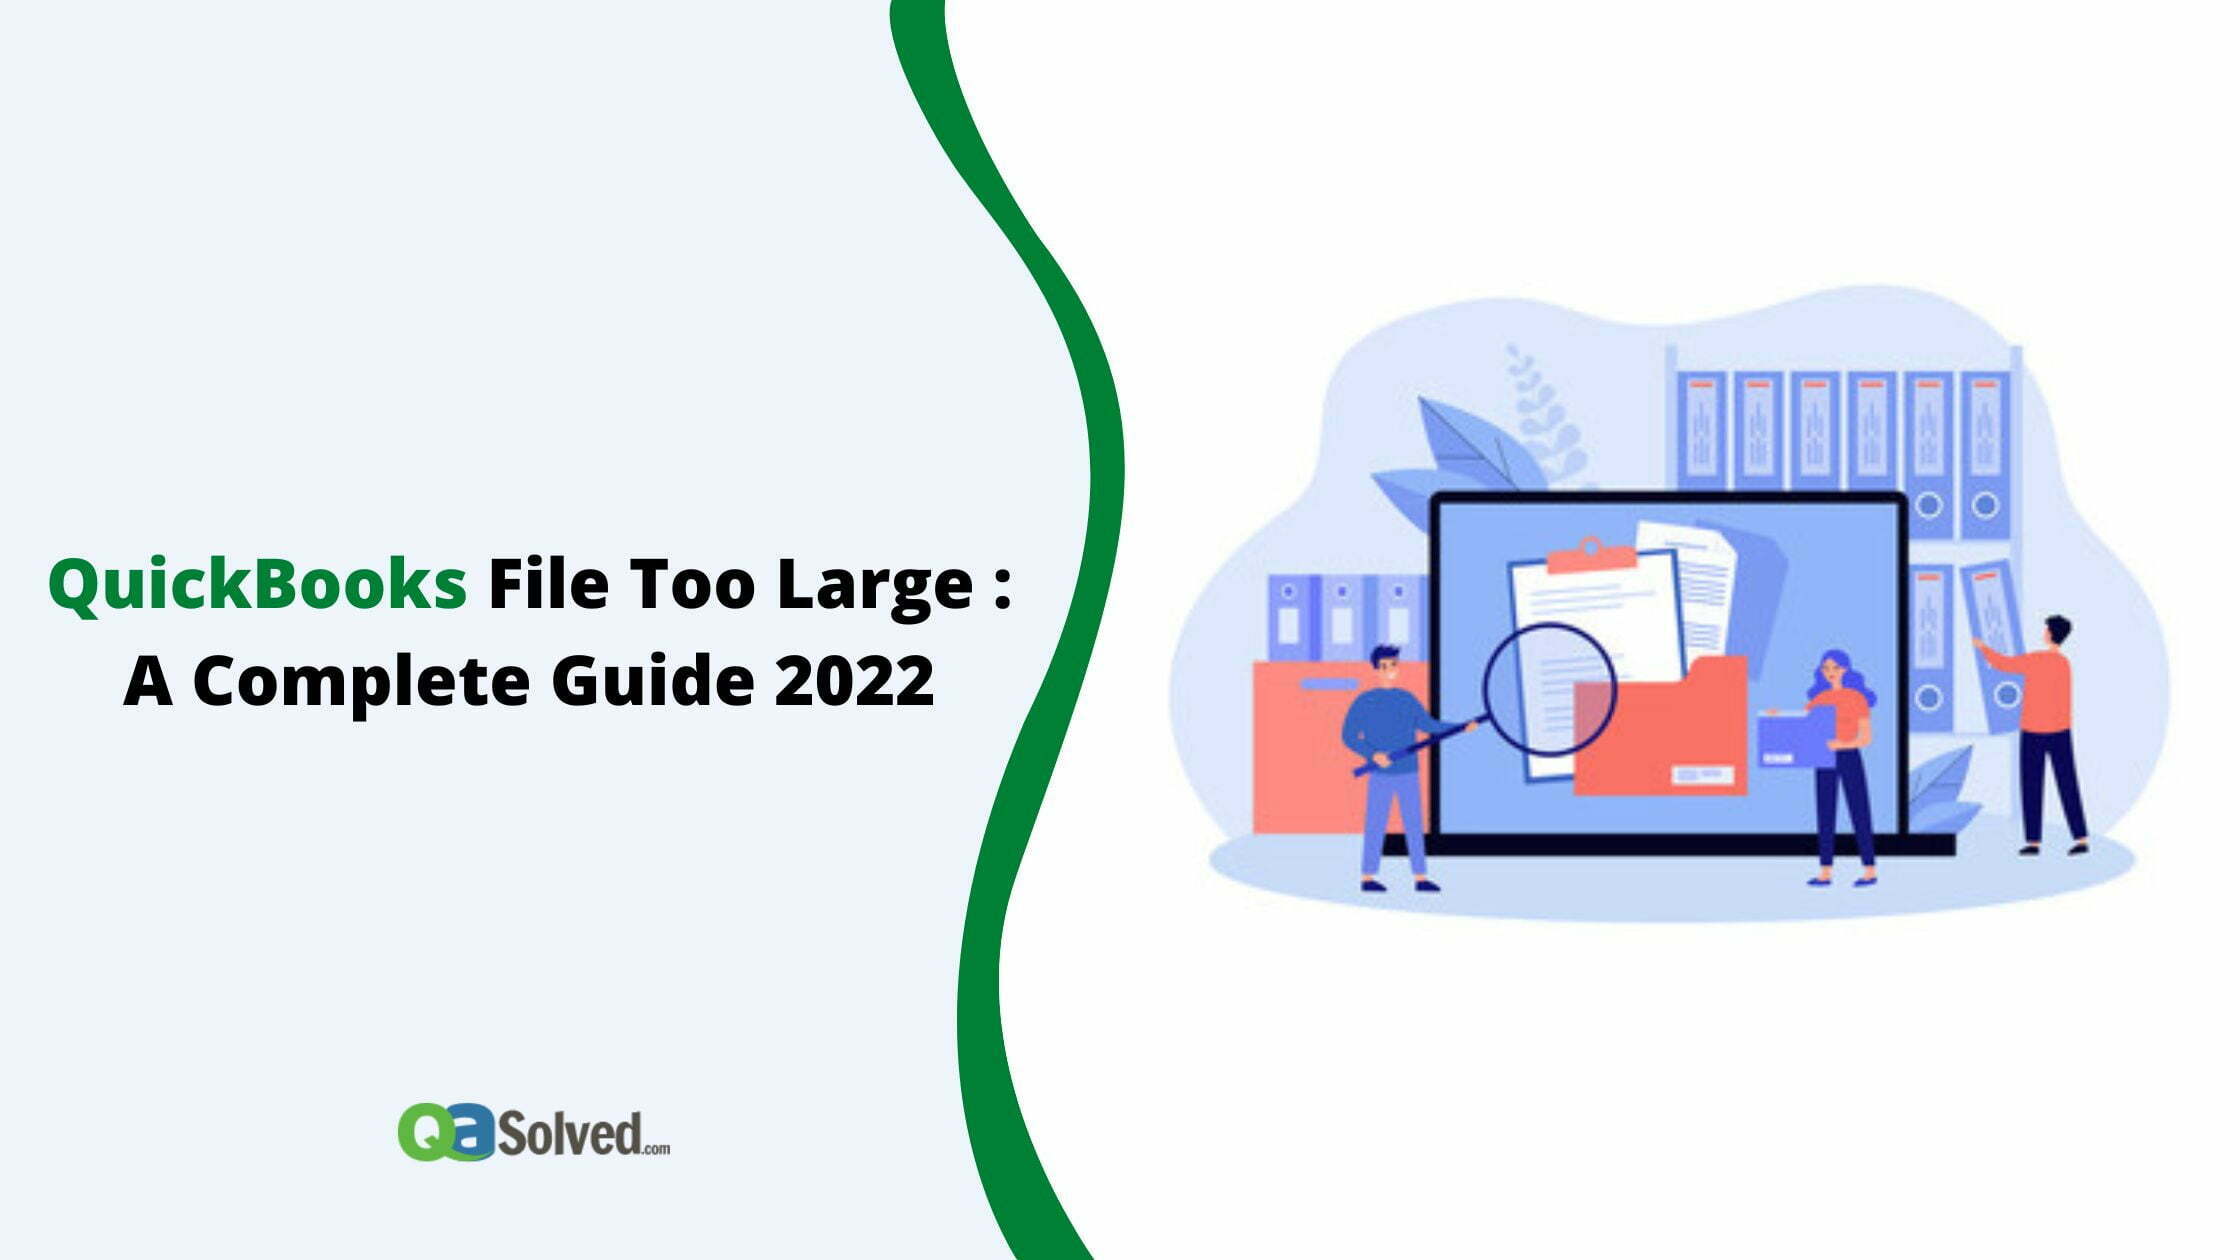 QuickBooks File Too Large : A Complete Guide 2022